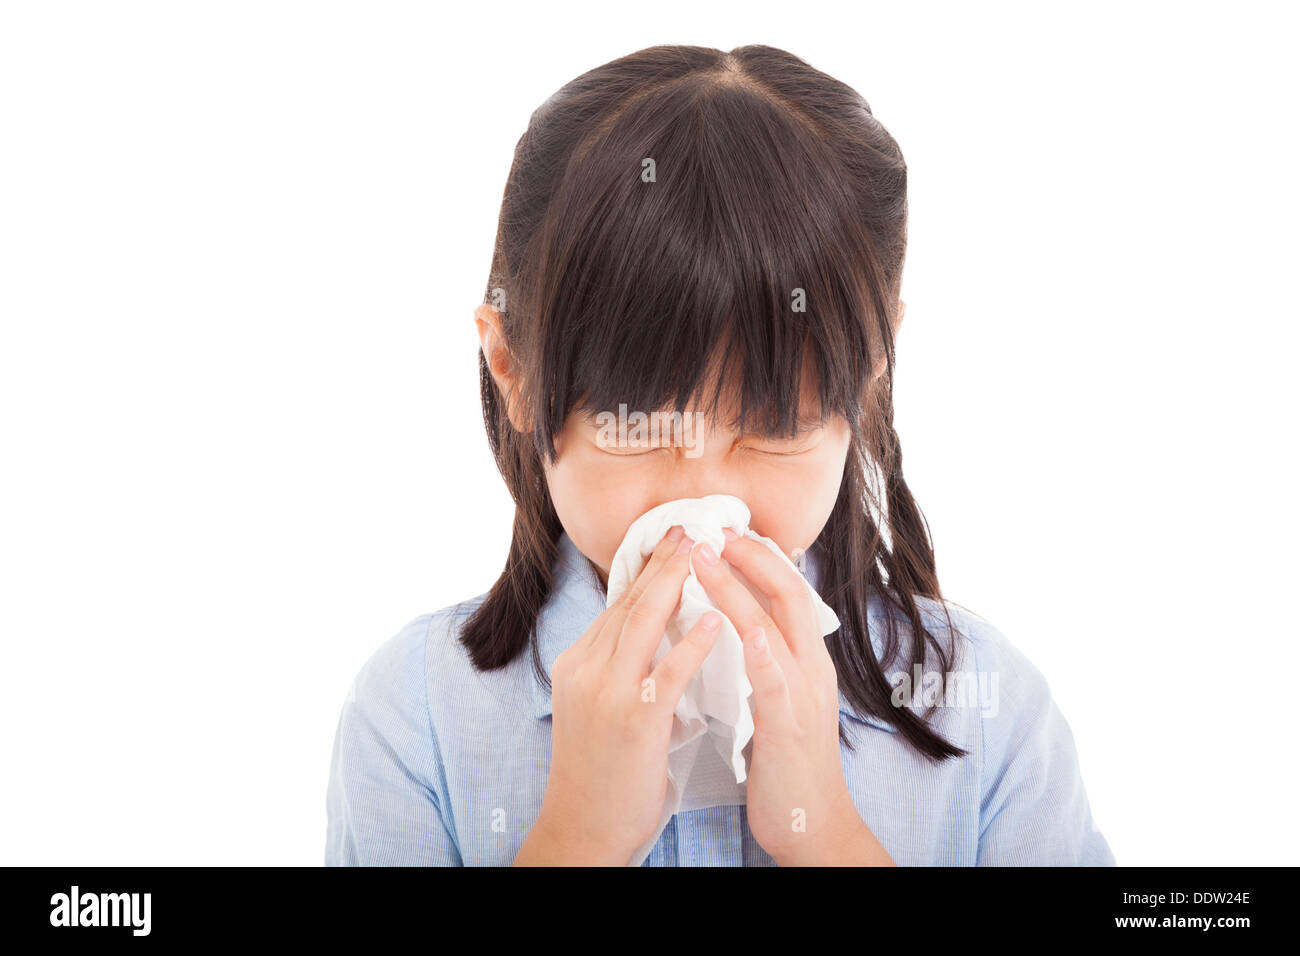 Little girl blows her nose Stock Photo